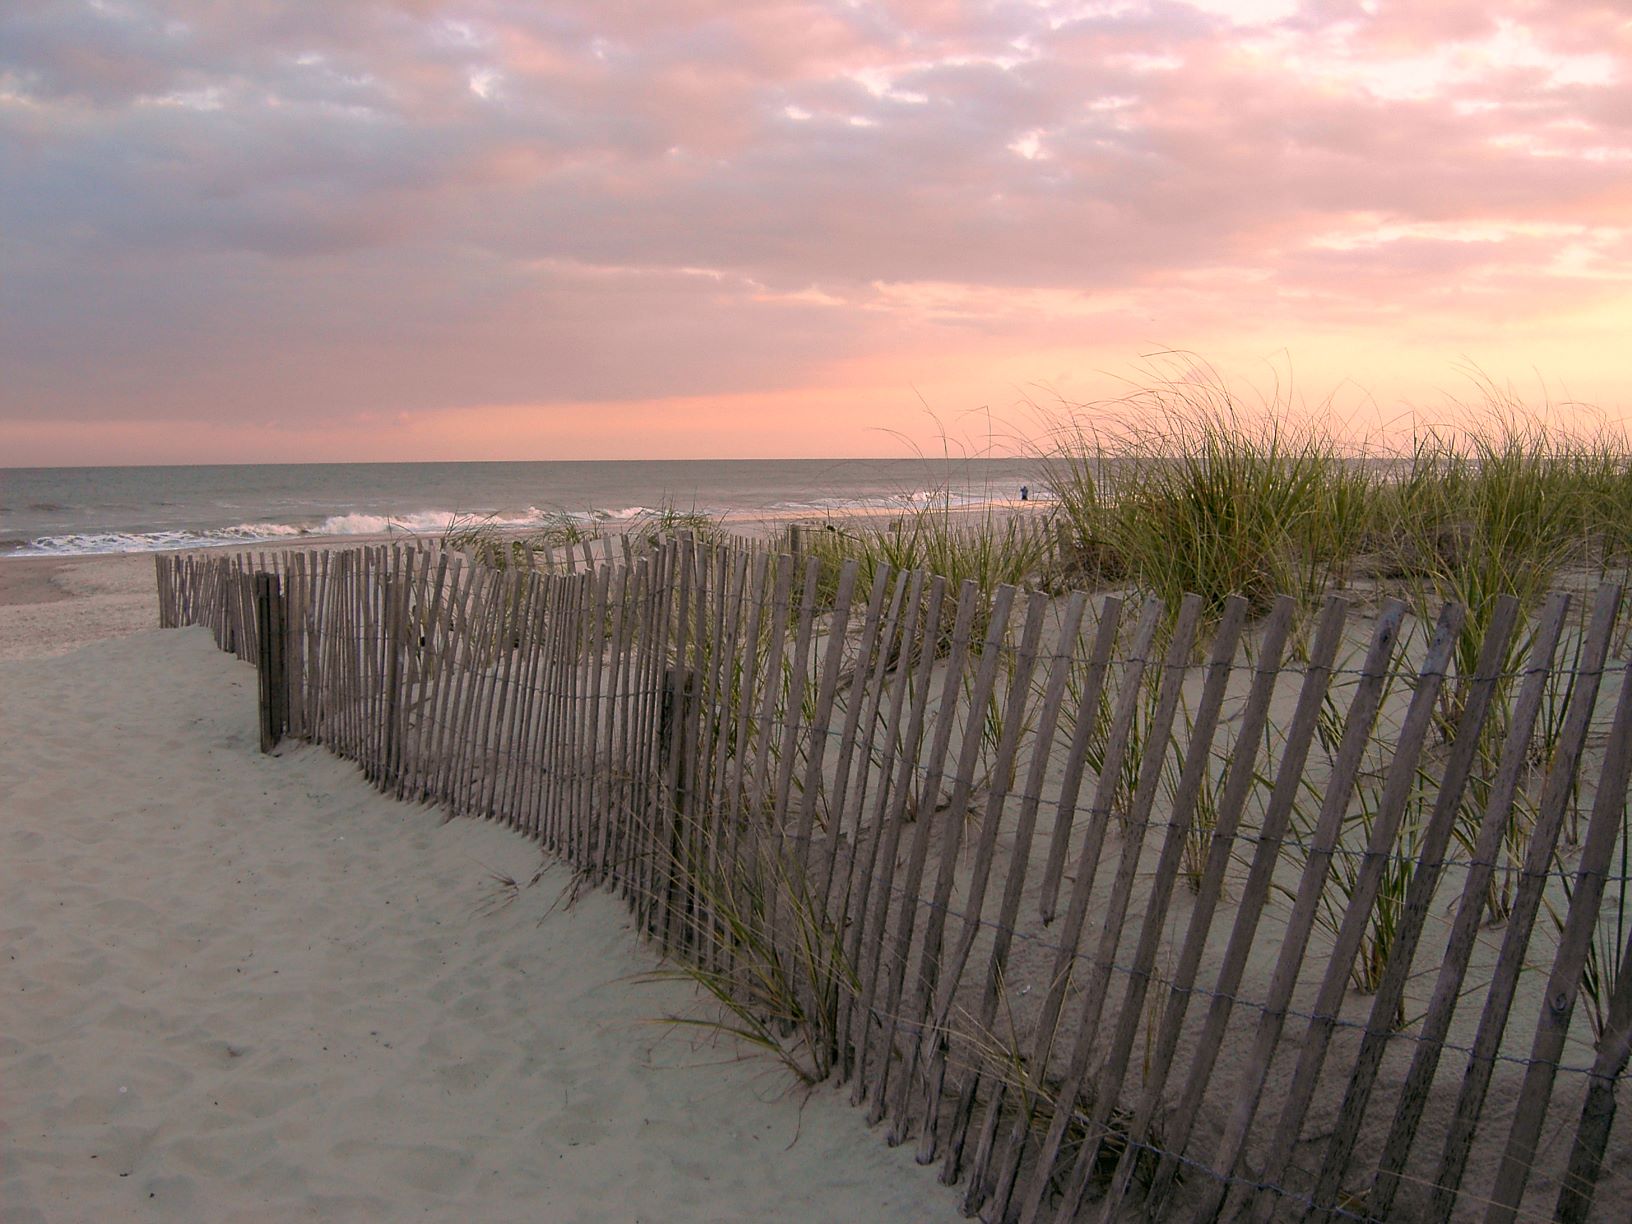 Why is it better to rent from a realtor vs. an AirBnB when visiting Ocean City, NJ?